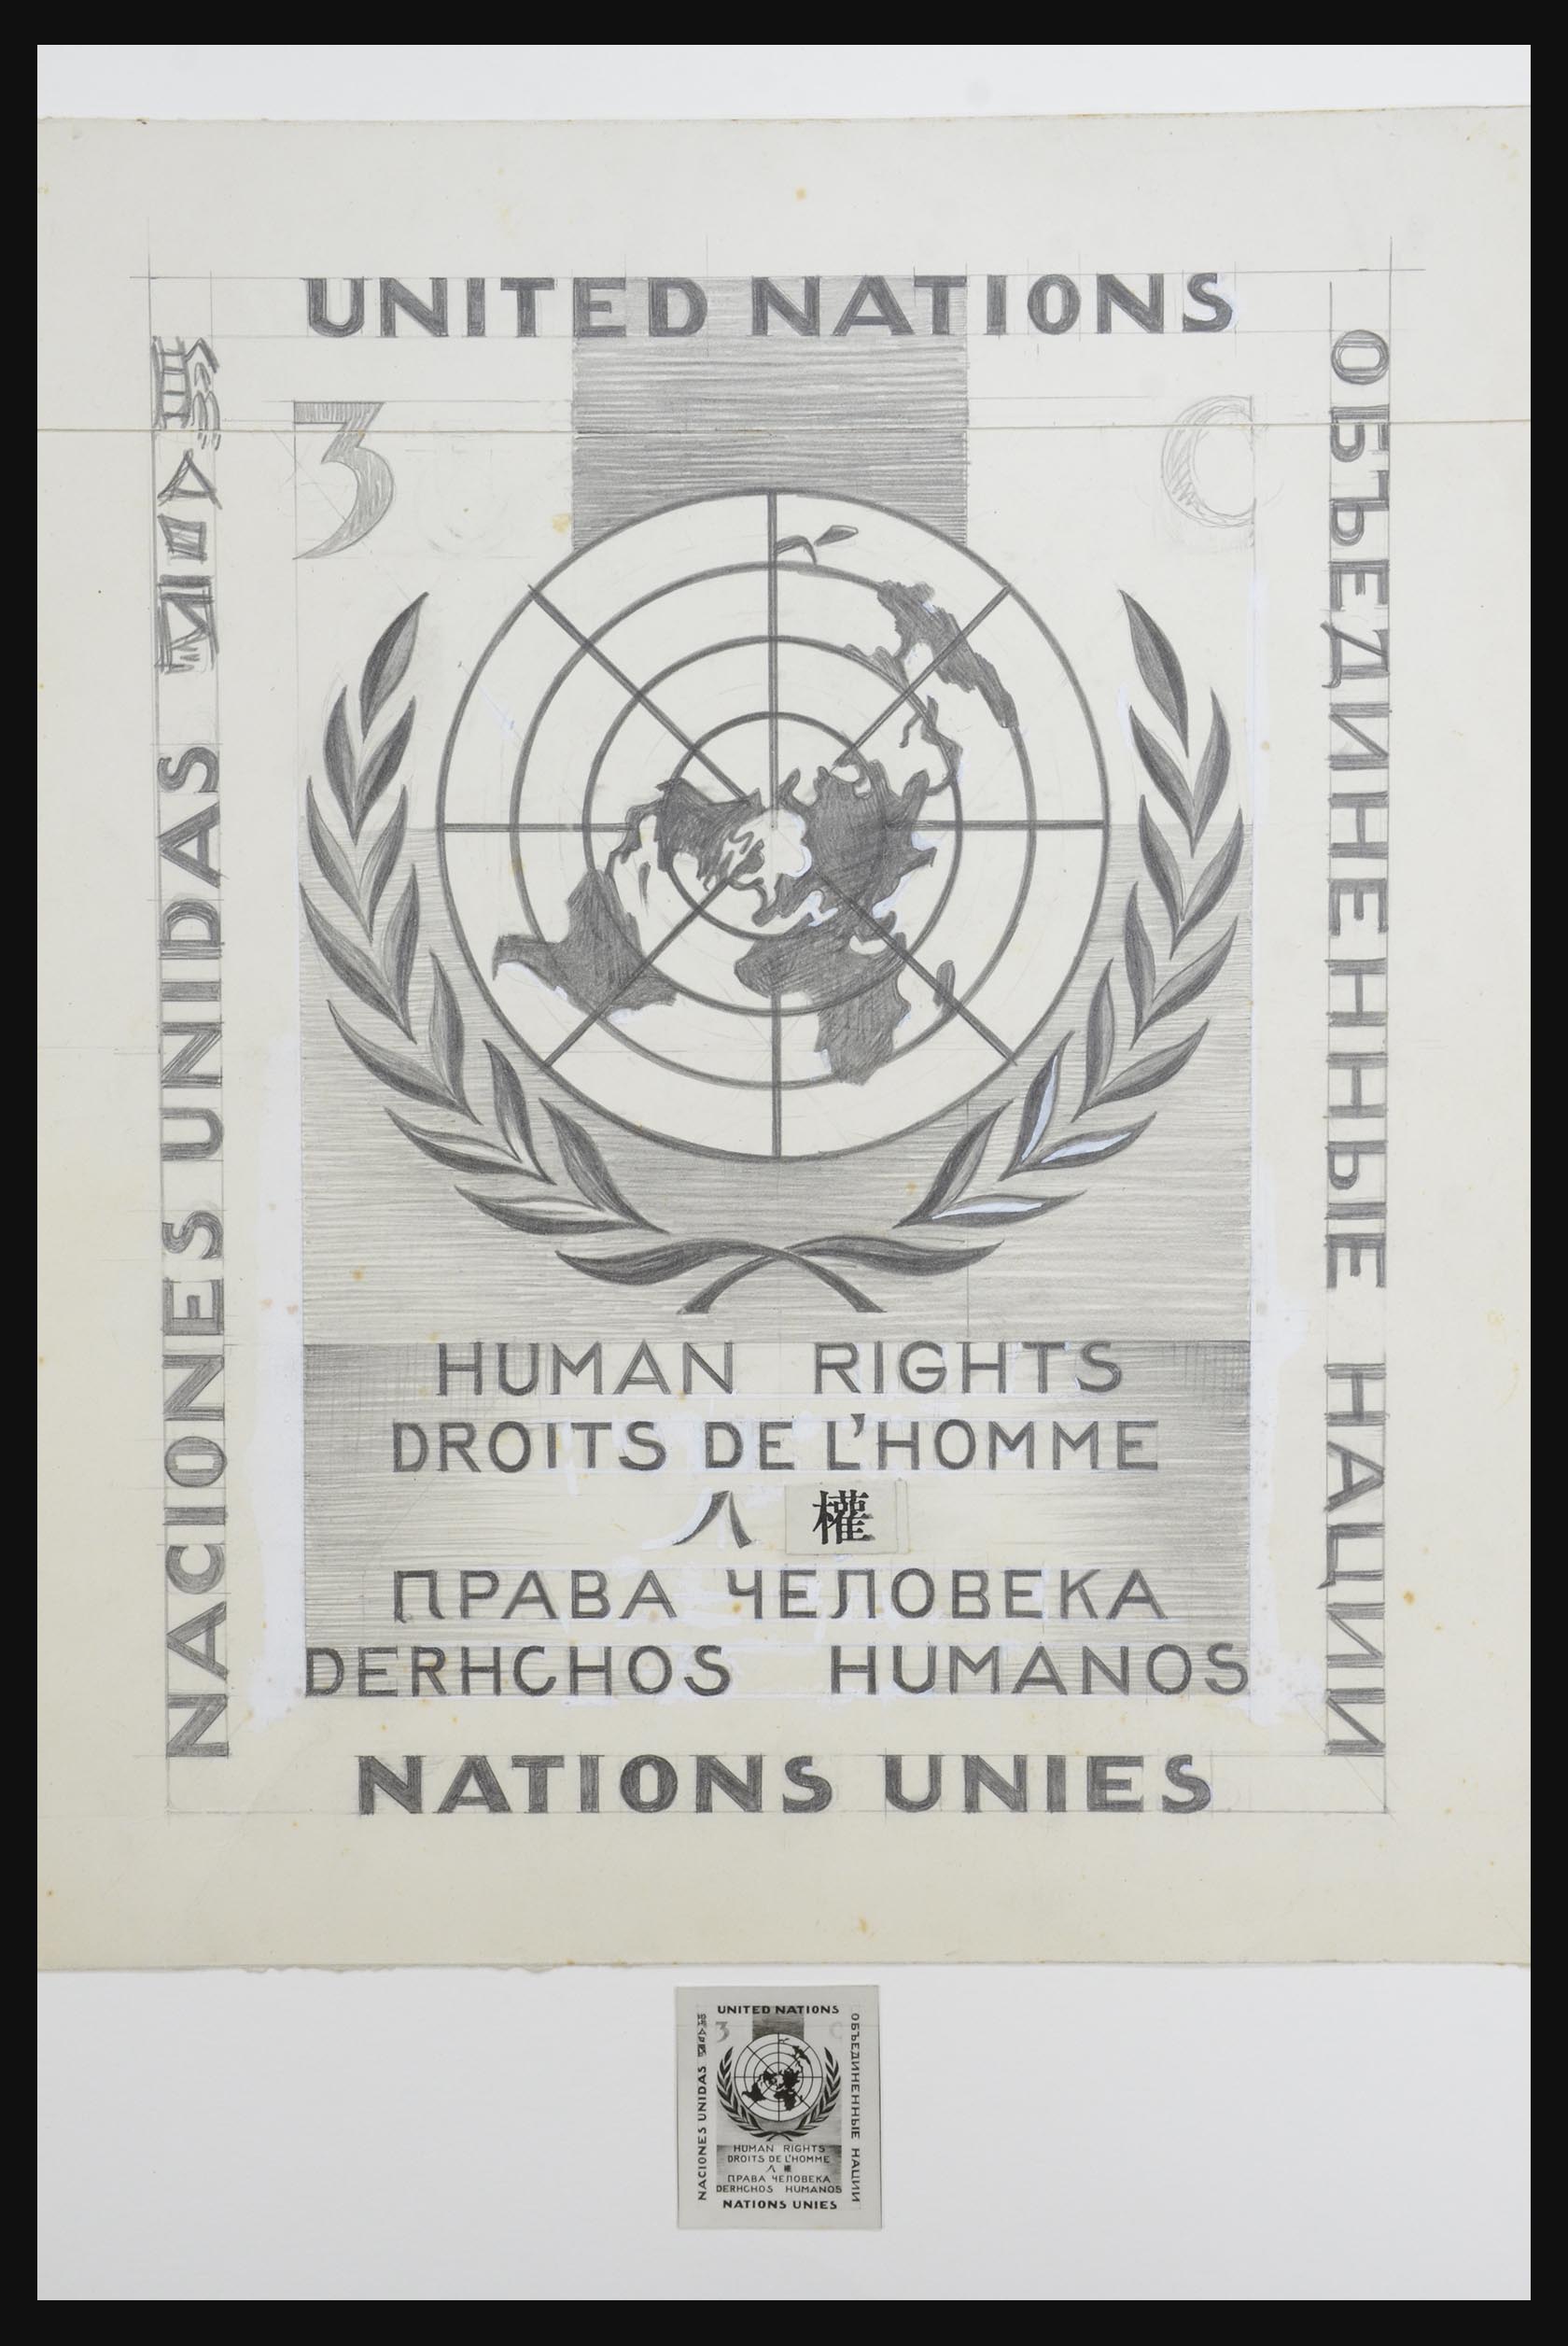 32348 003 - 32348 United Nations New York designs.